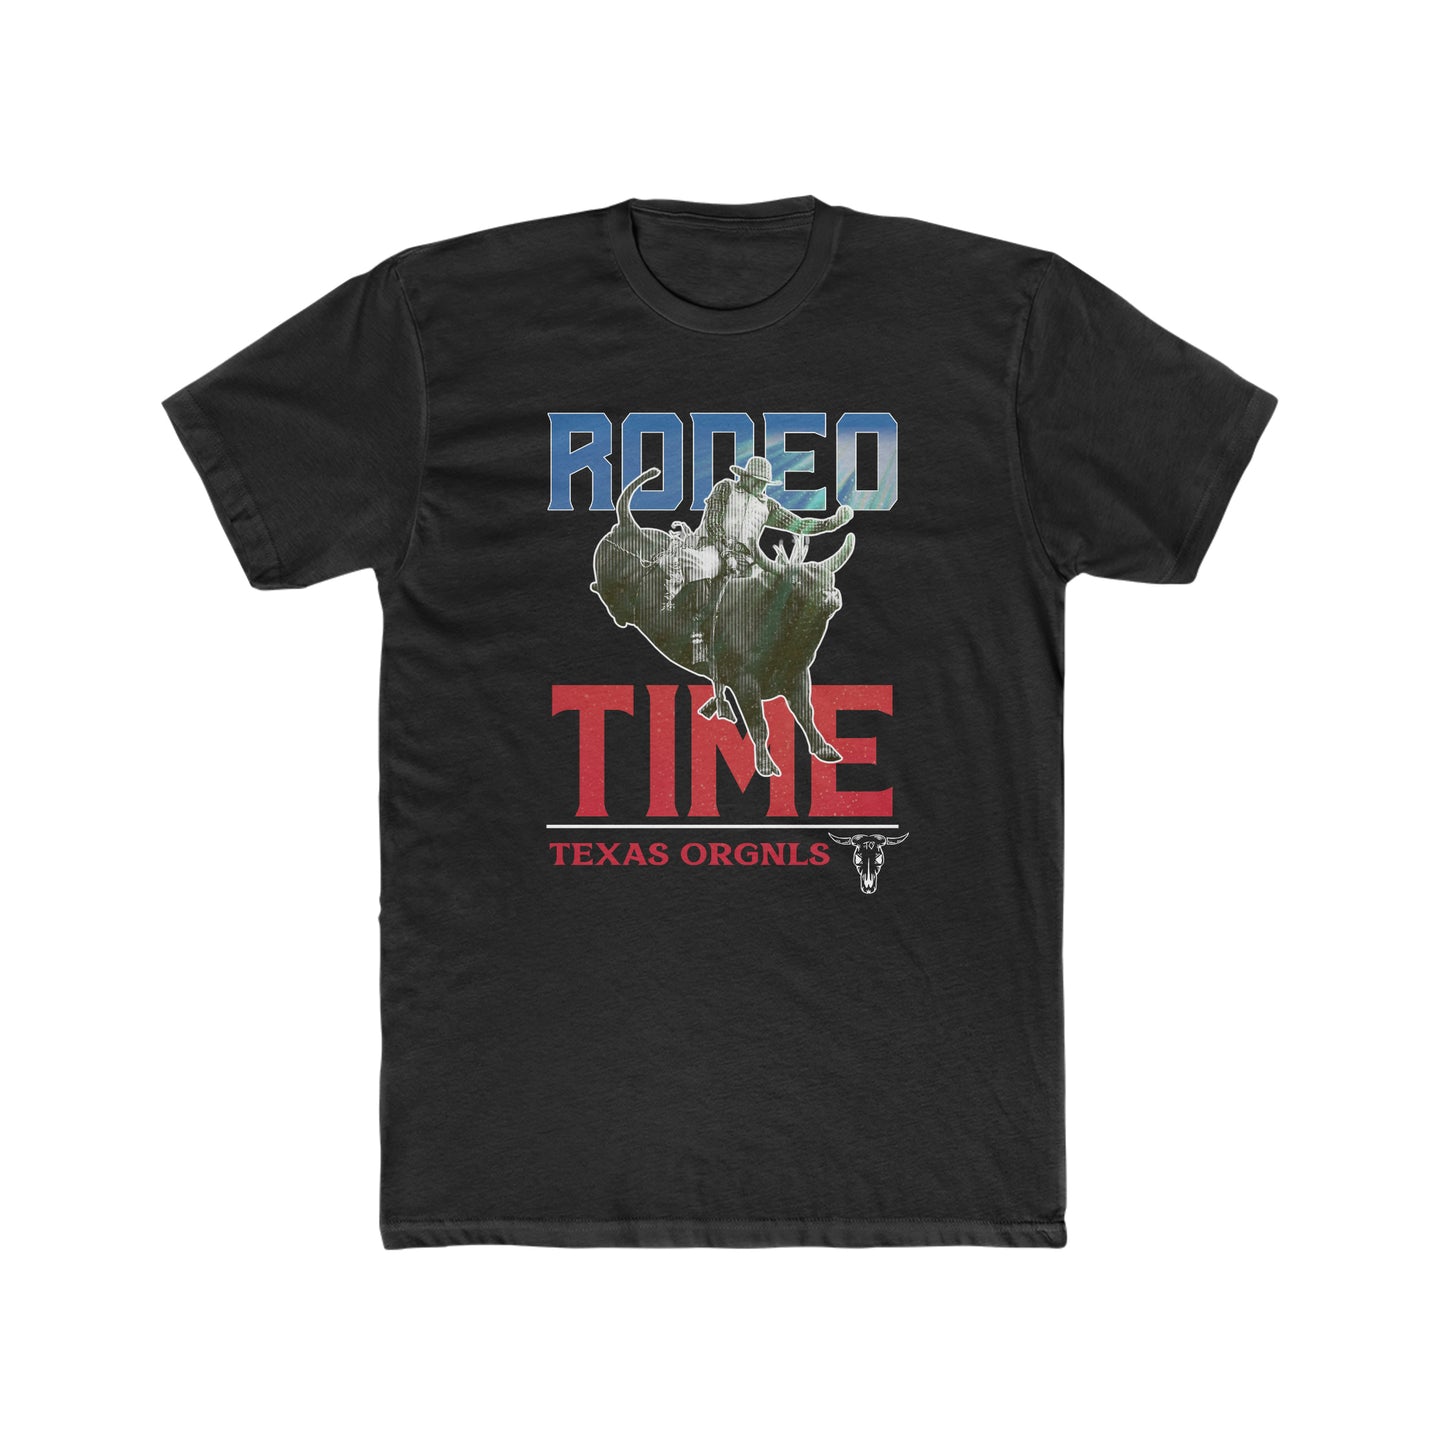 Texas Orgnls “Rodeo Time” Unisex Tee